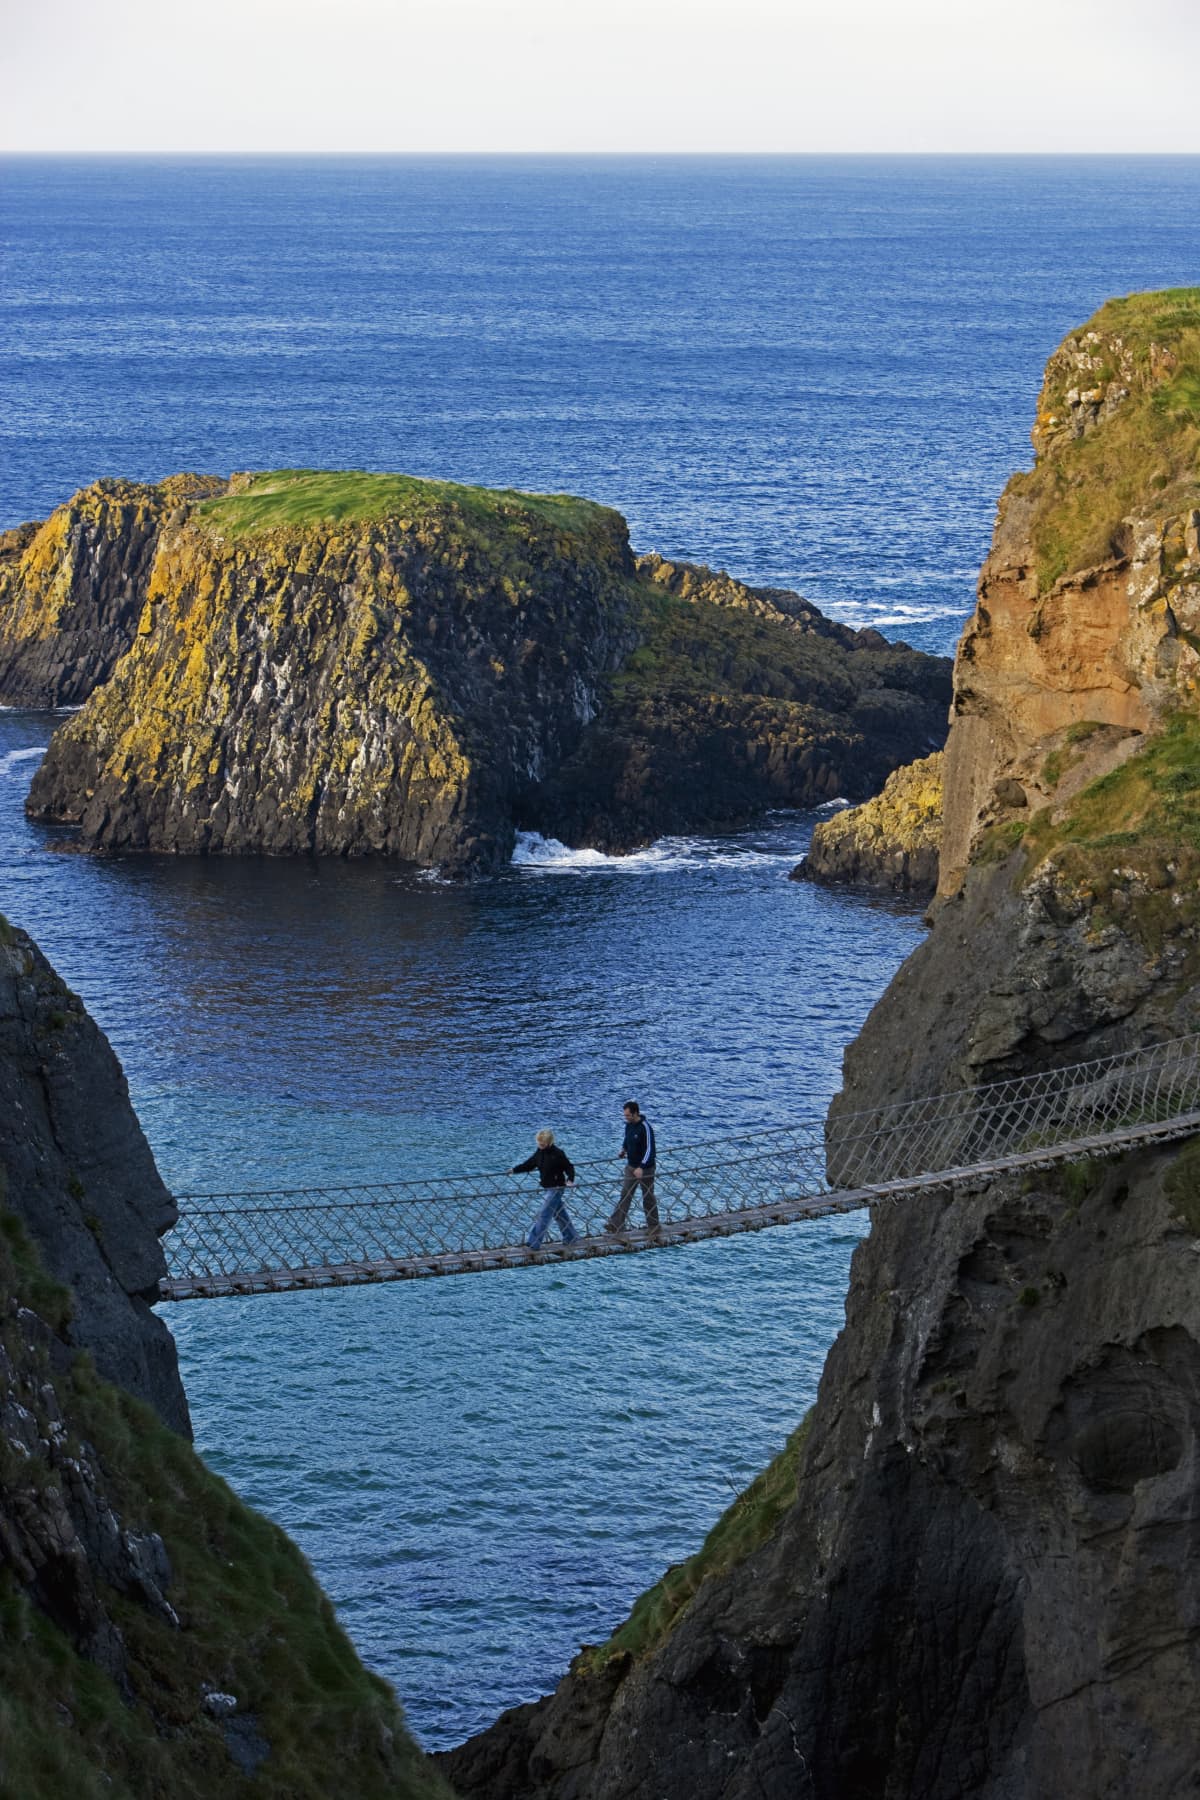 Two people walk on the rope bridge in Carrick-A-Rede